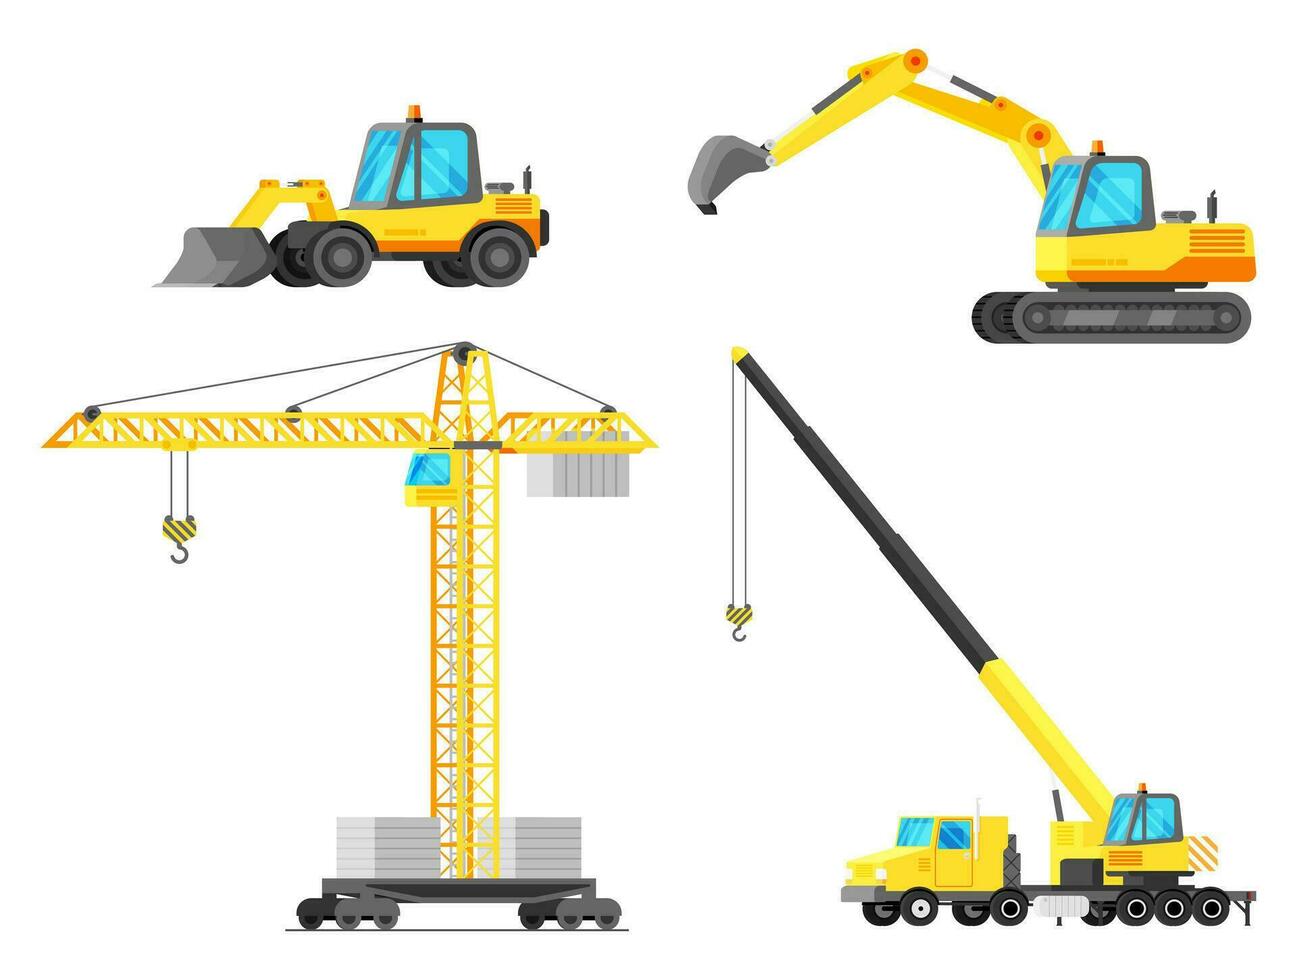 Building Machines Icon Set. Construction Equipment Collection Isolated on White. Tower Crane, Crane Truck, Excavator, Bulldozer. House Building Machine. Industrial Equipment. Flat Vector Illustration